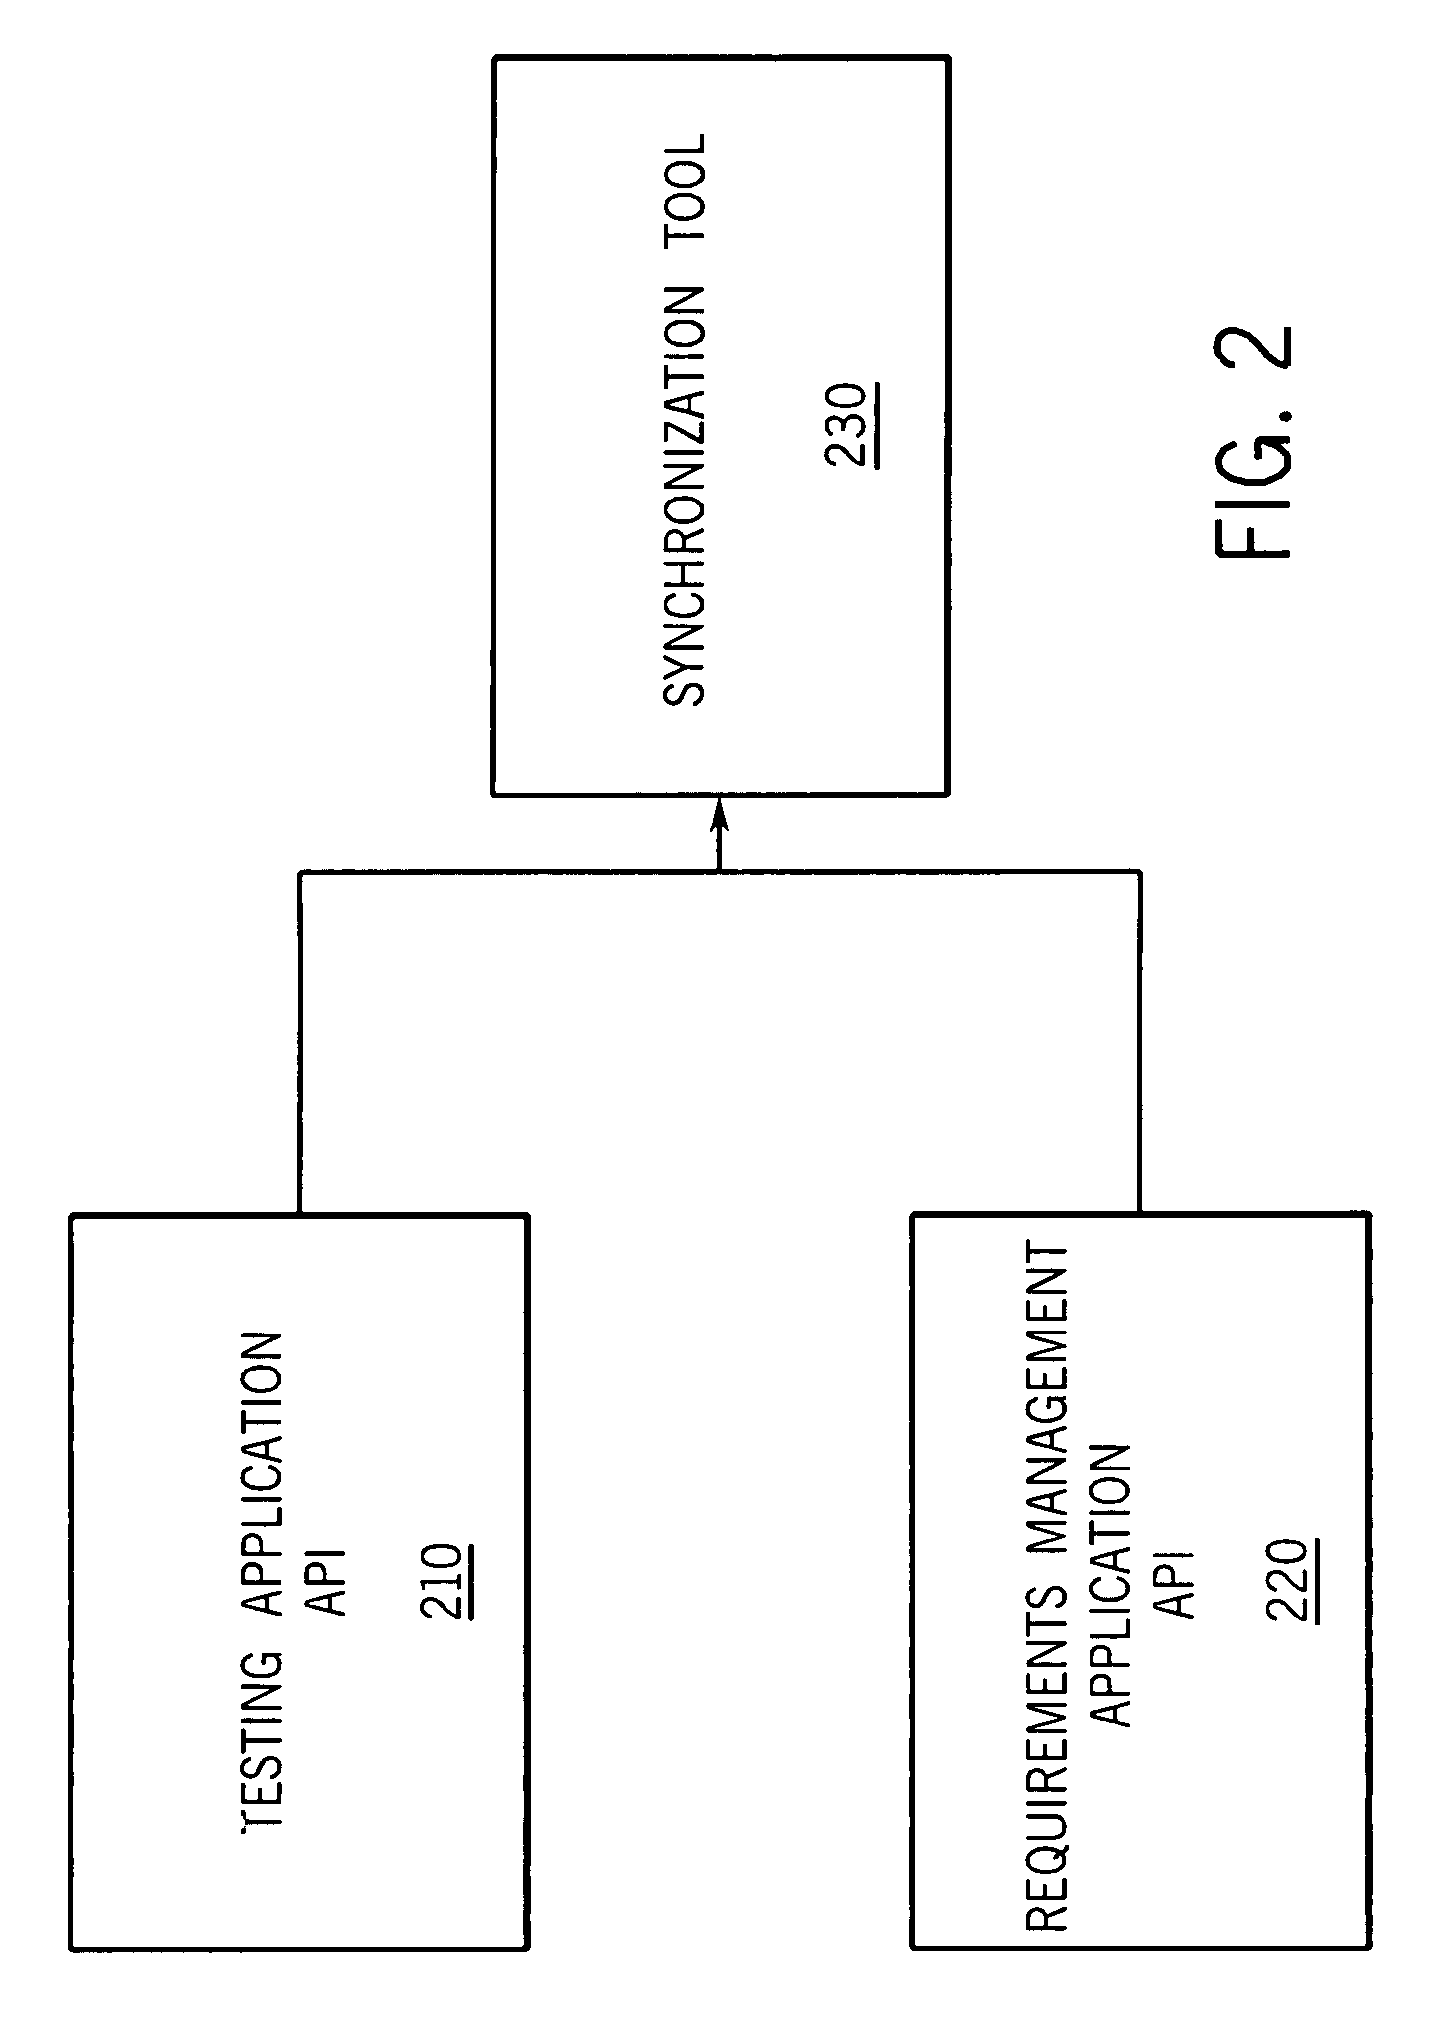 System and method for maintaining requirements traceability